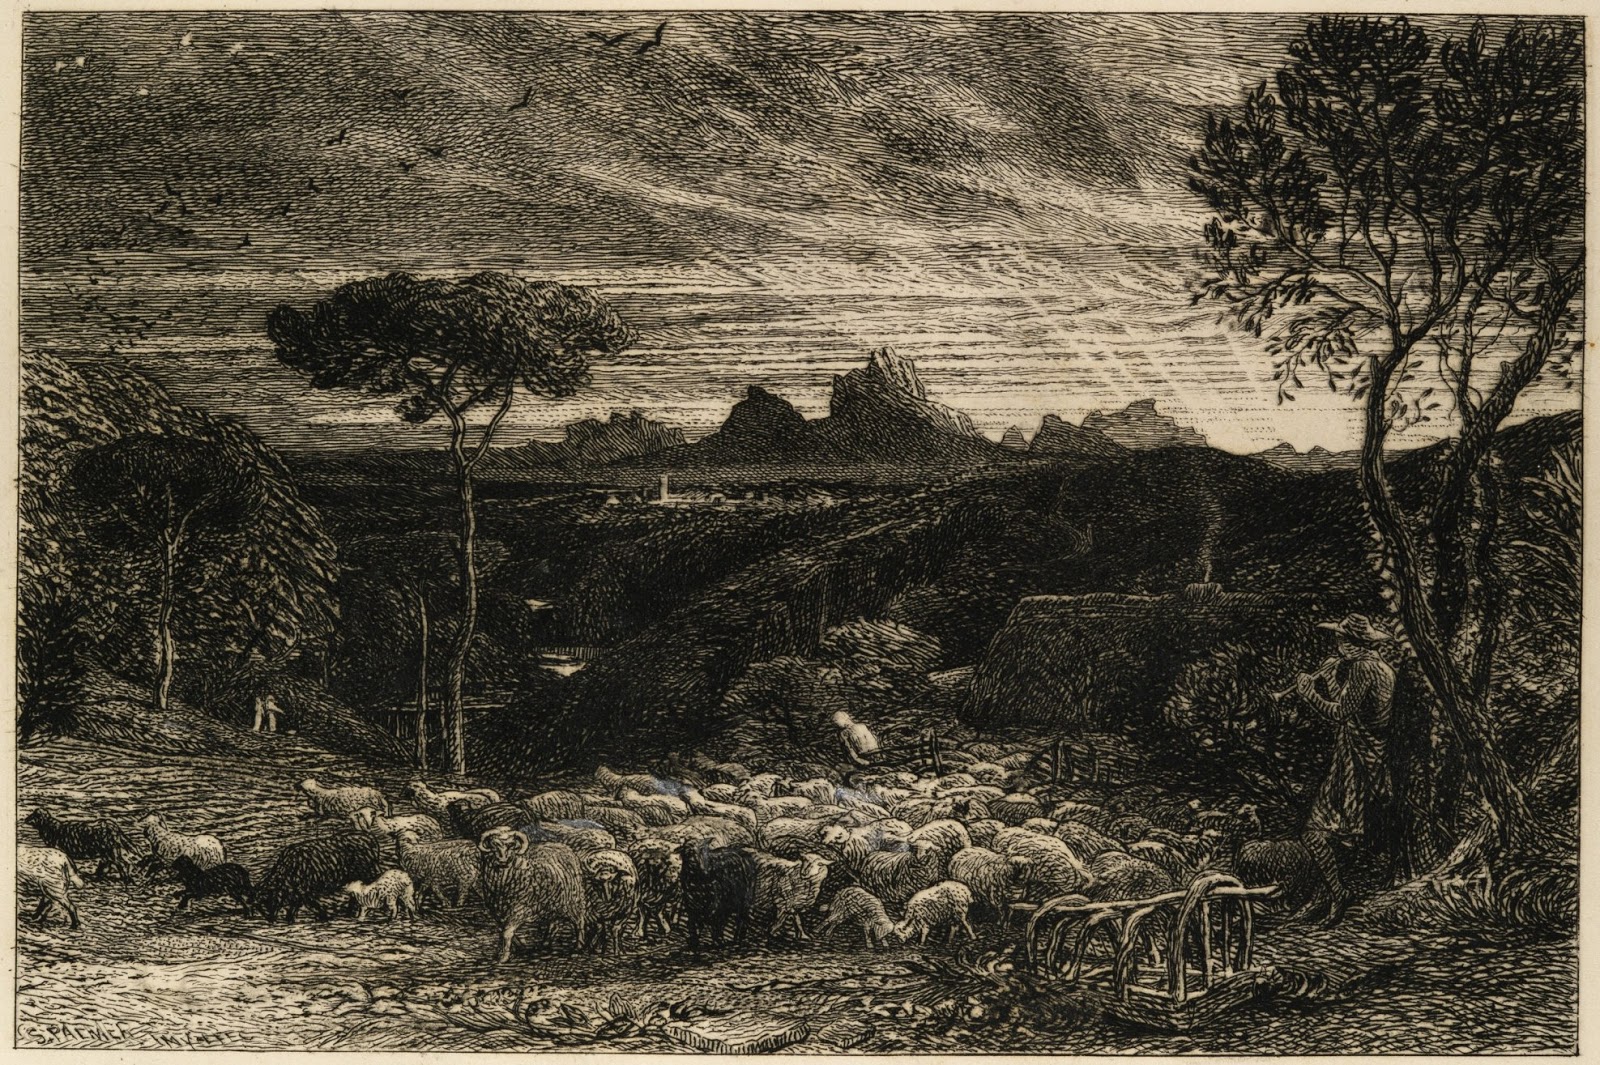 Spencer Alley: Landscapes by Samuel Palmer, 19th century